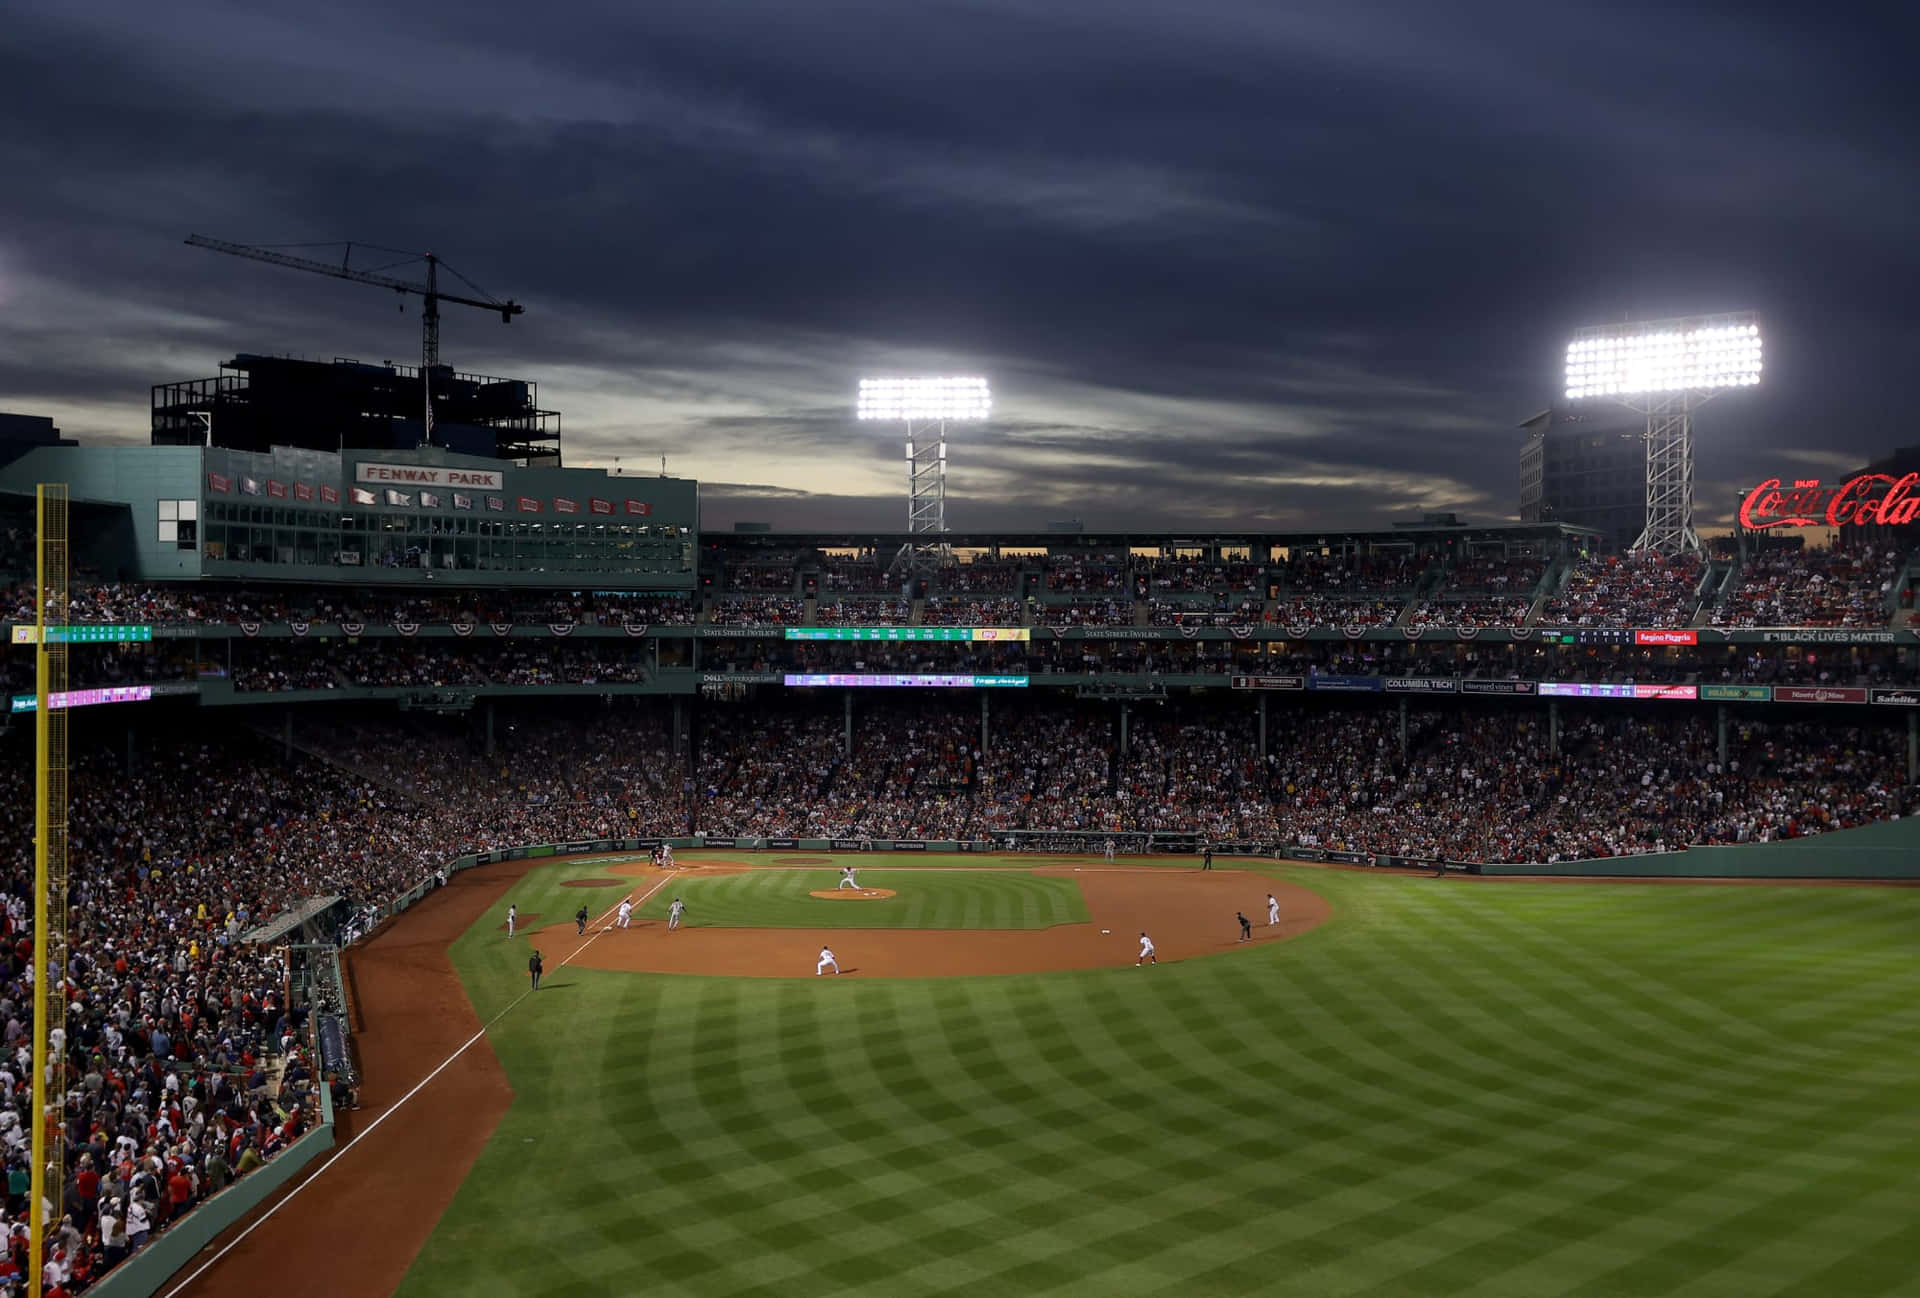 Enjoy a baseball game in the iconic Fenway Park Wallpaper